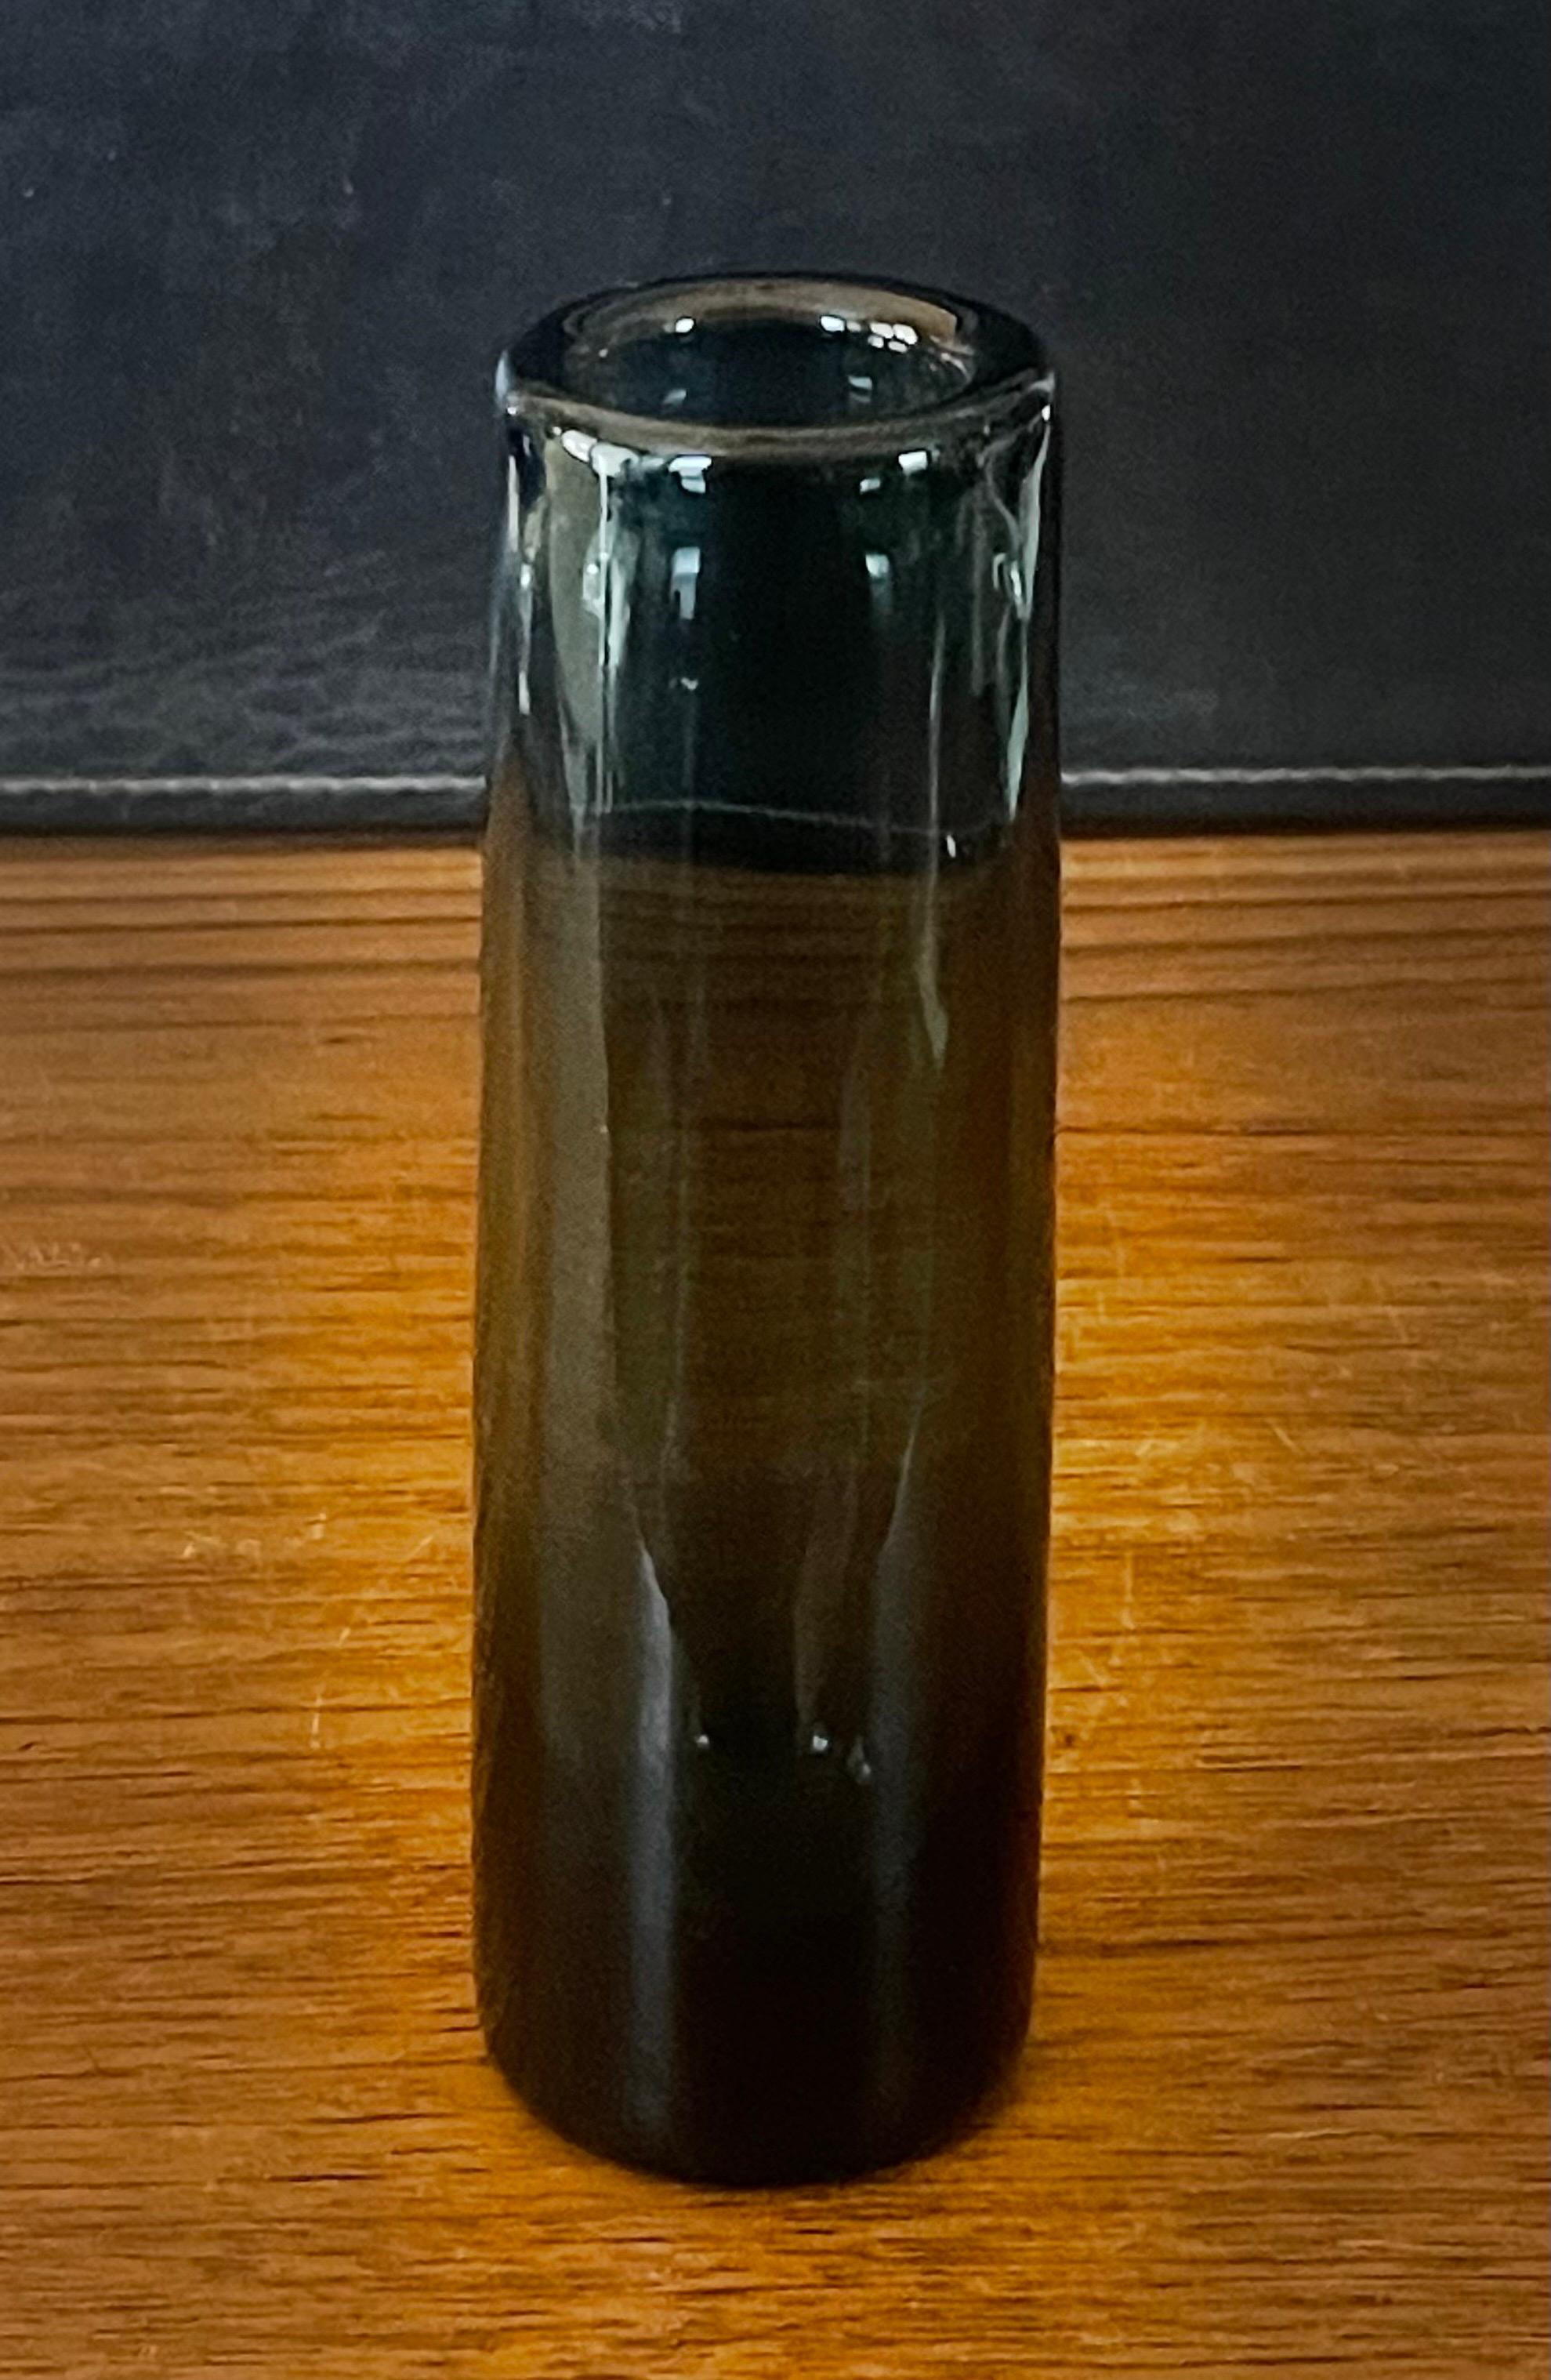 A very attractive hand blown smoked glass cylindrical vase by Per Lutken for Holmegaard, circa 1960s. The piece is in very good vintage condition with no chips or cracks and measures 2